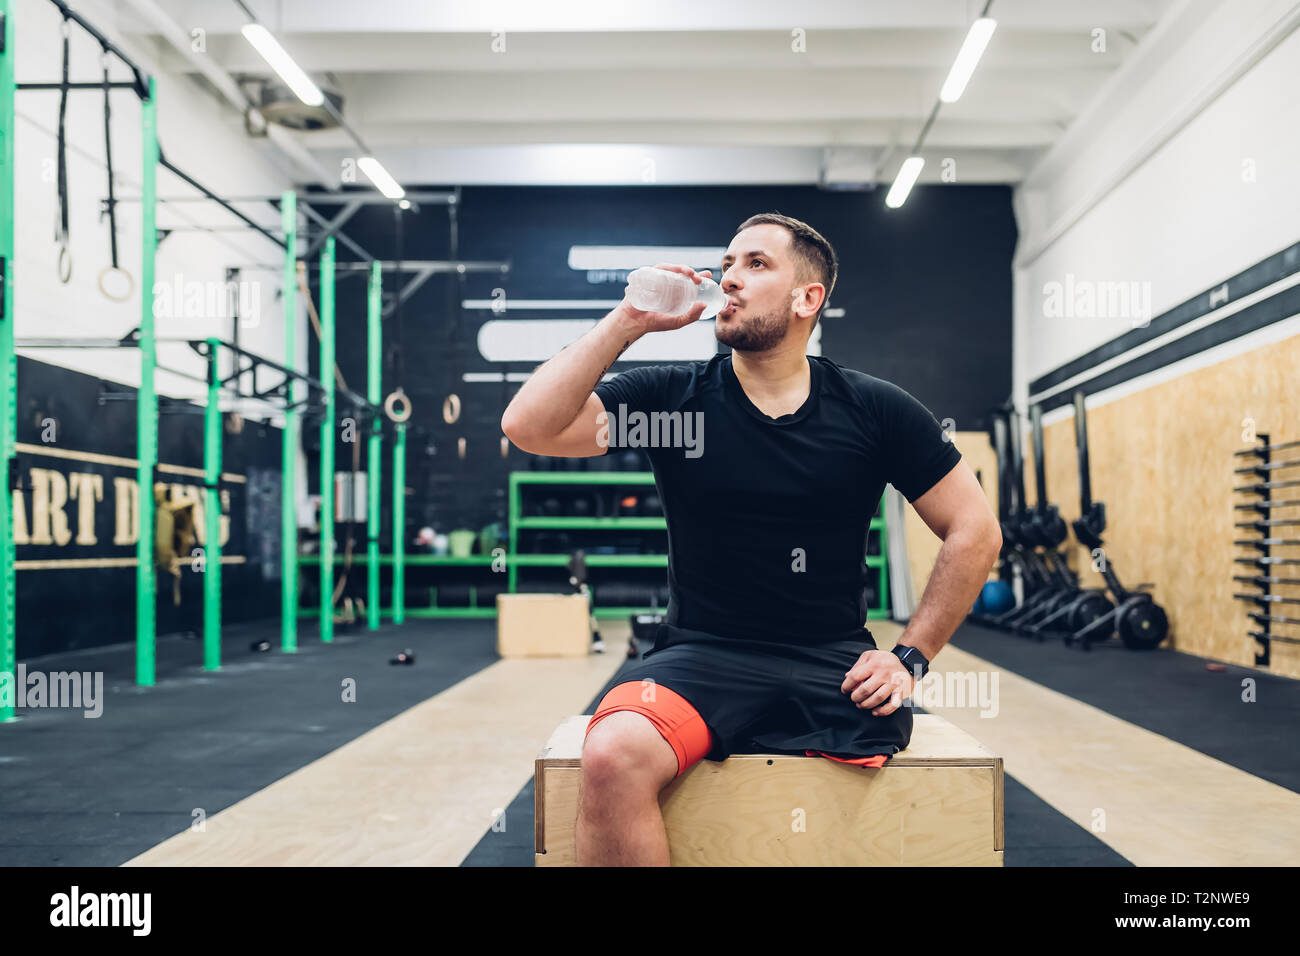 Man with disability drinking water in gym Stock Photo